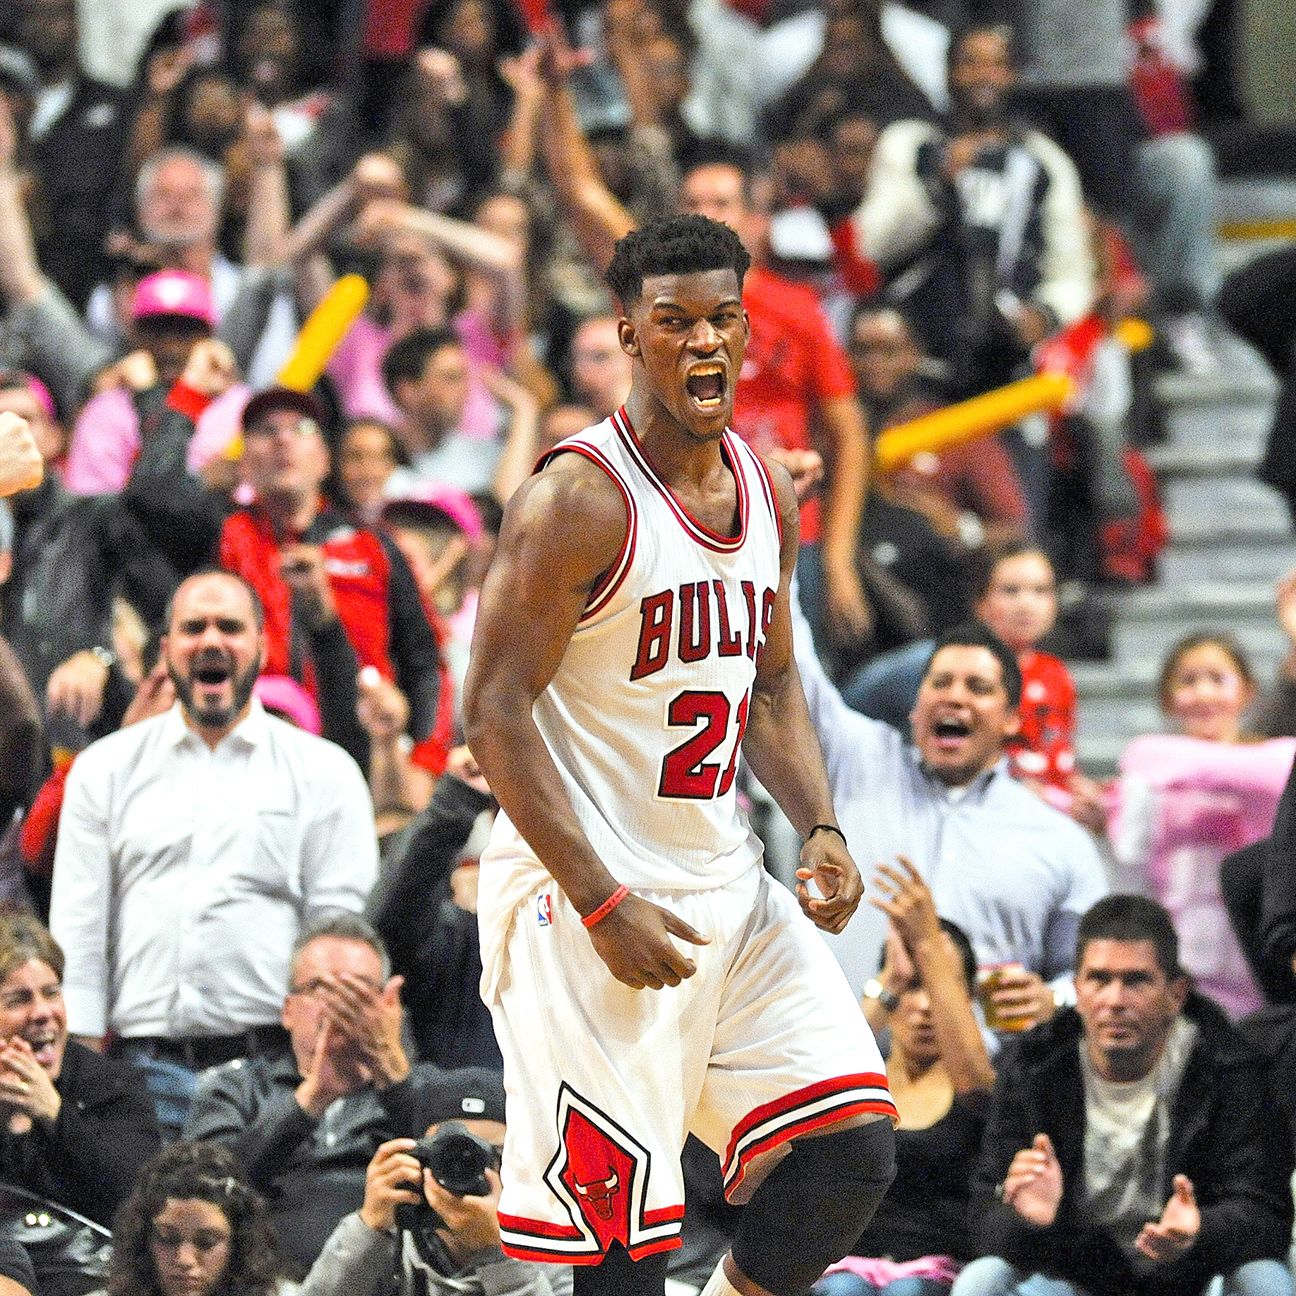 Jimmy Butler's unusual path to becoming a star